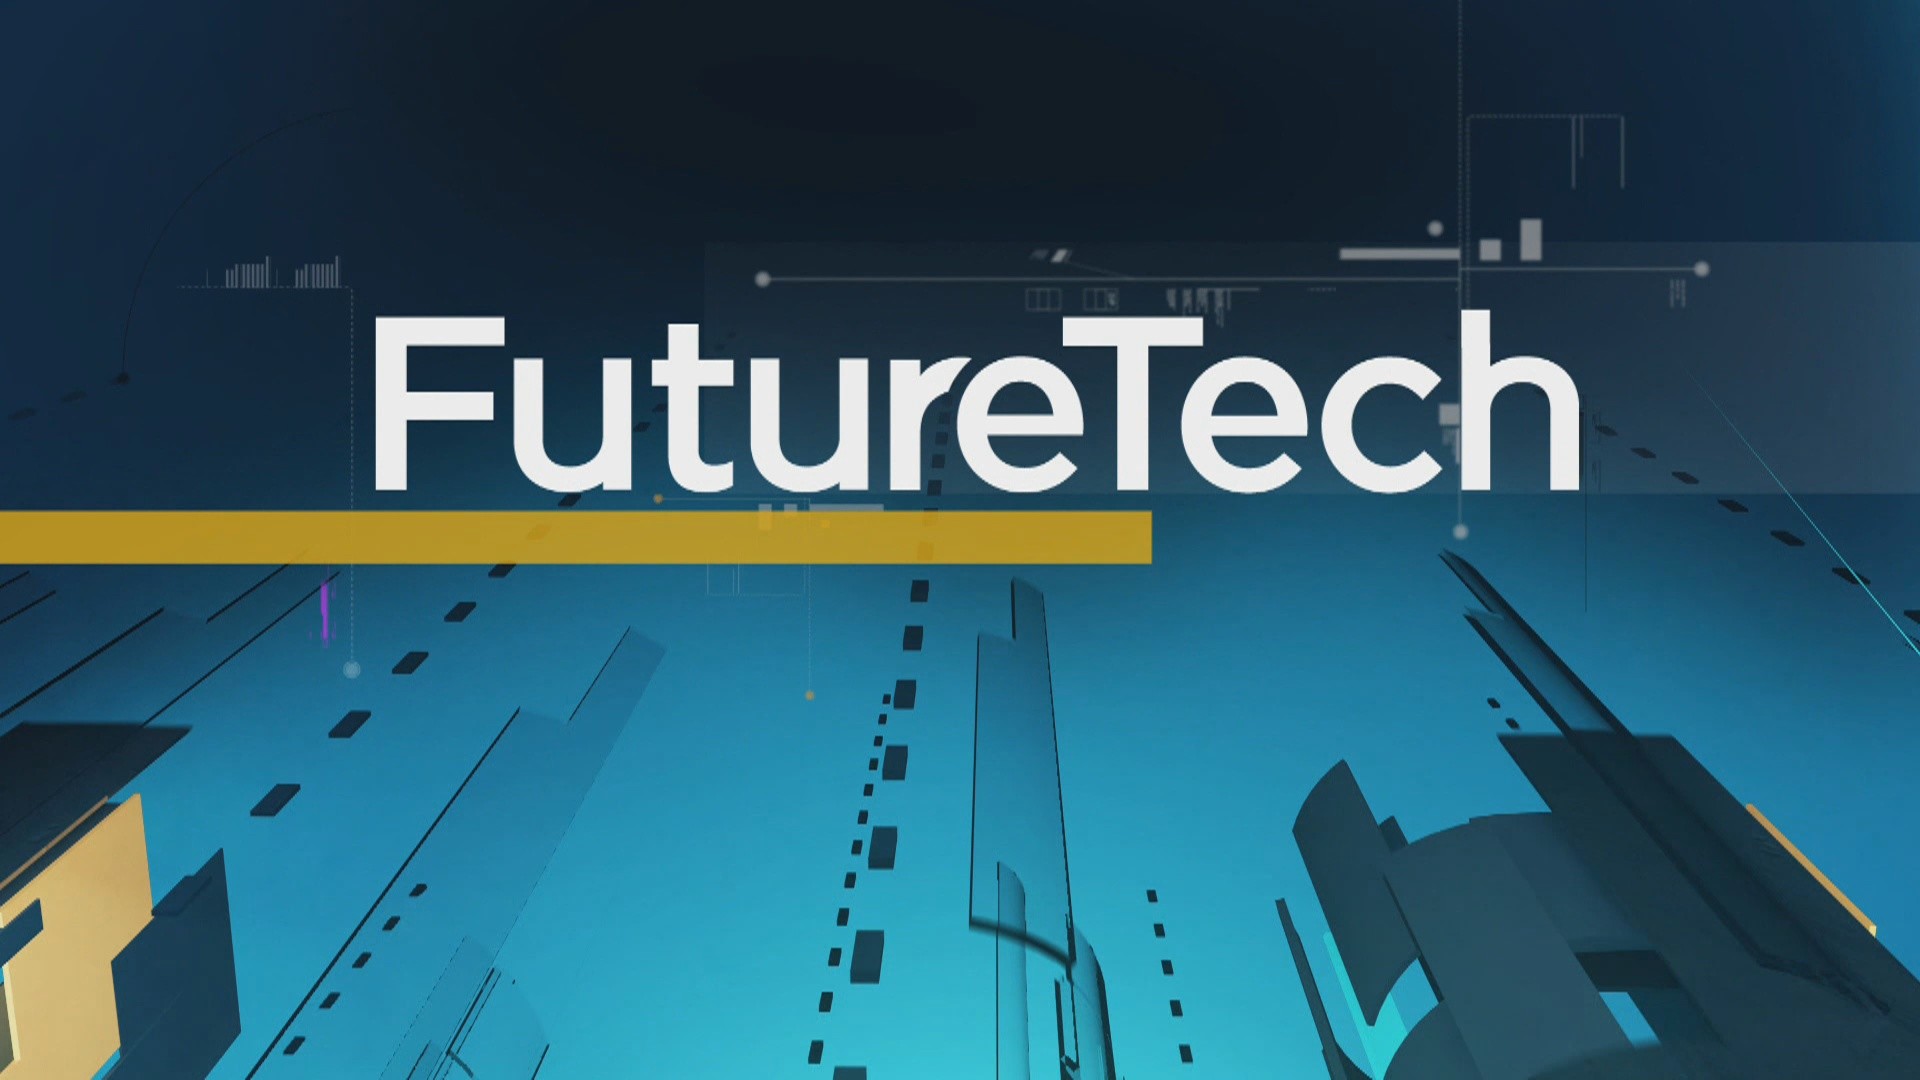 Download - Amd The Future Is Fusion , HD Wallpaper & Backgrounds